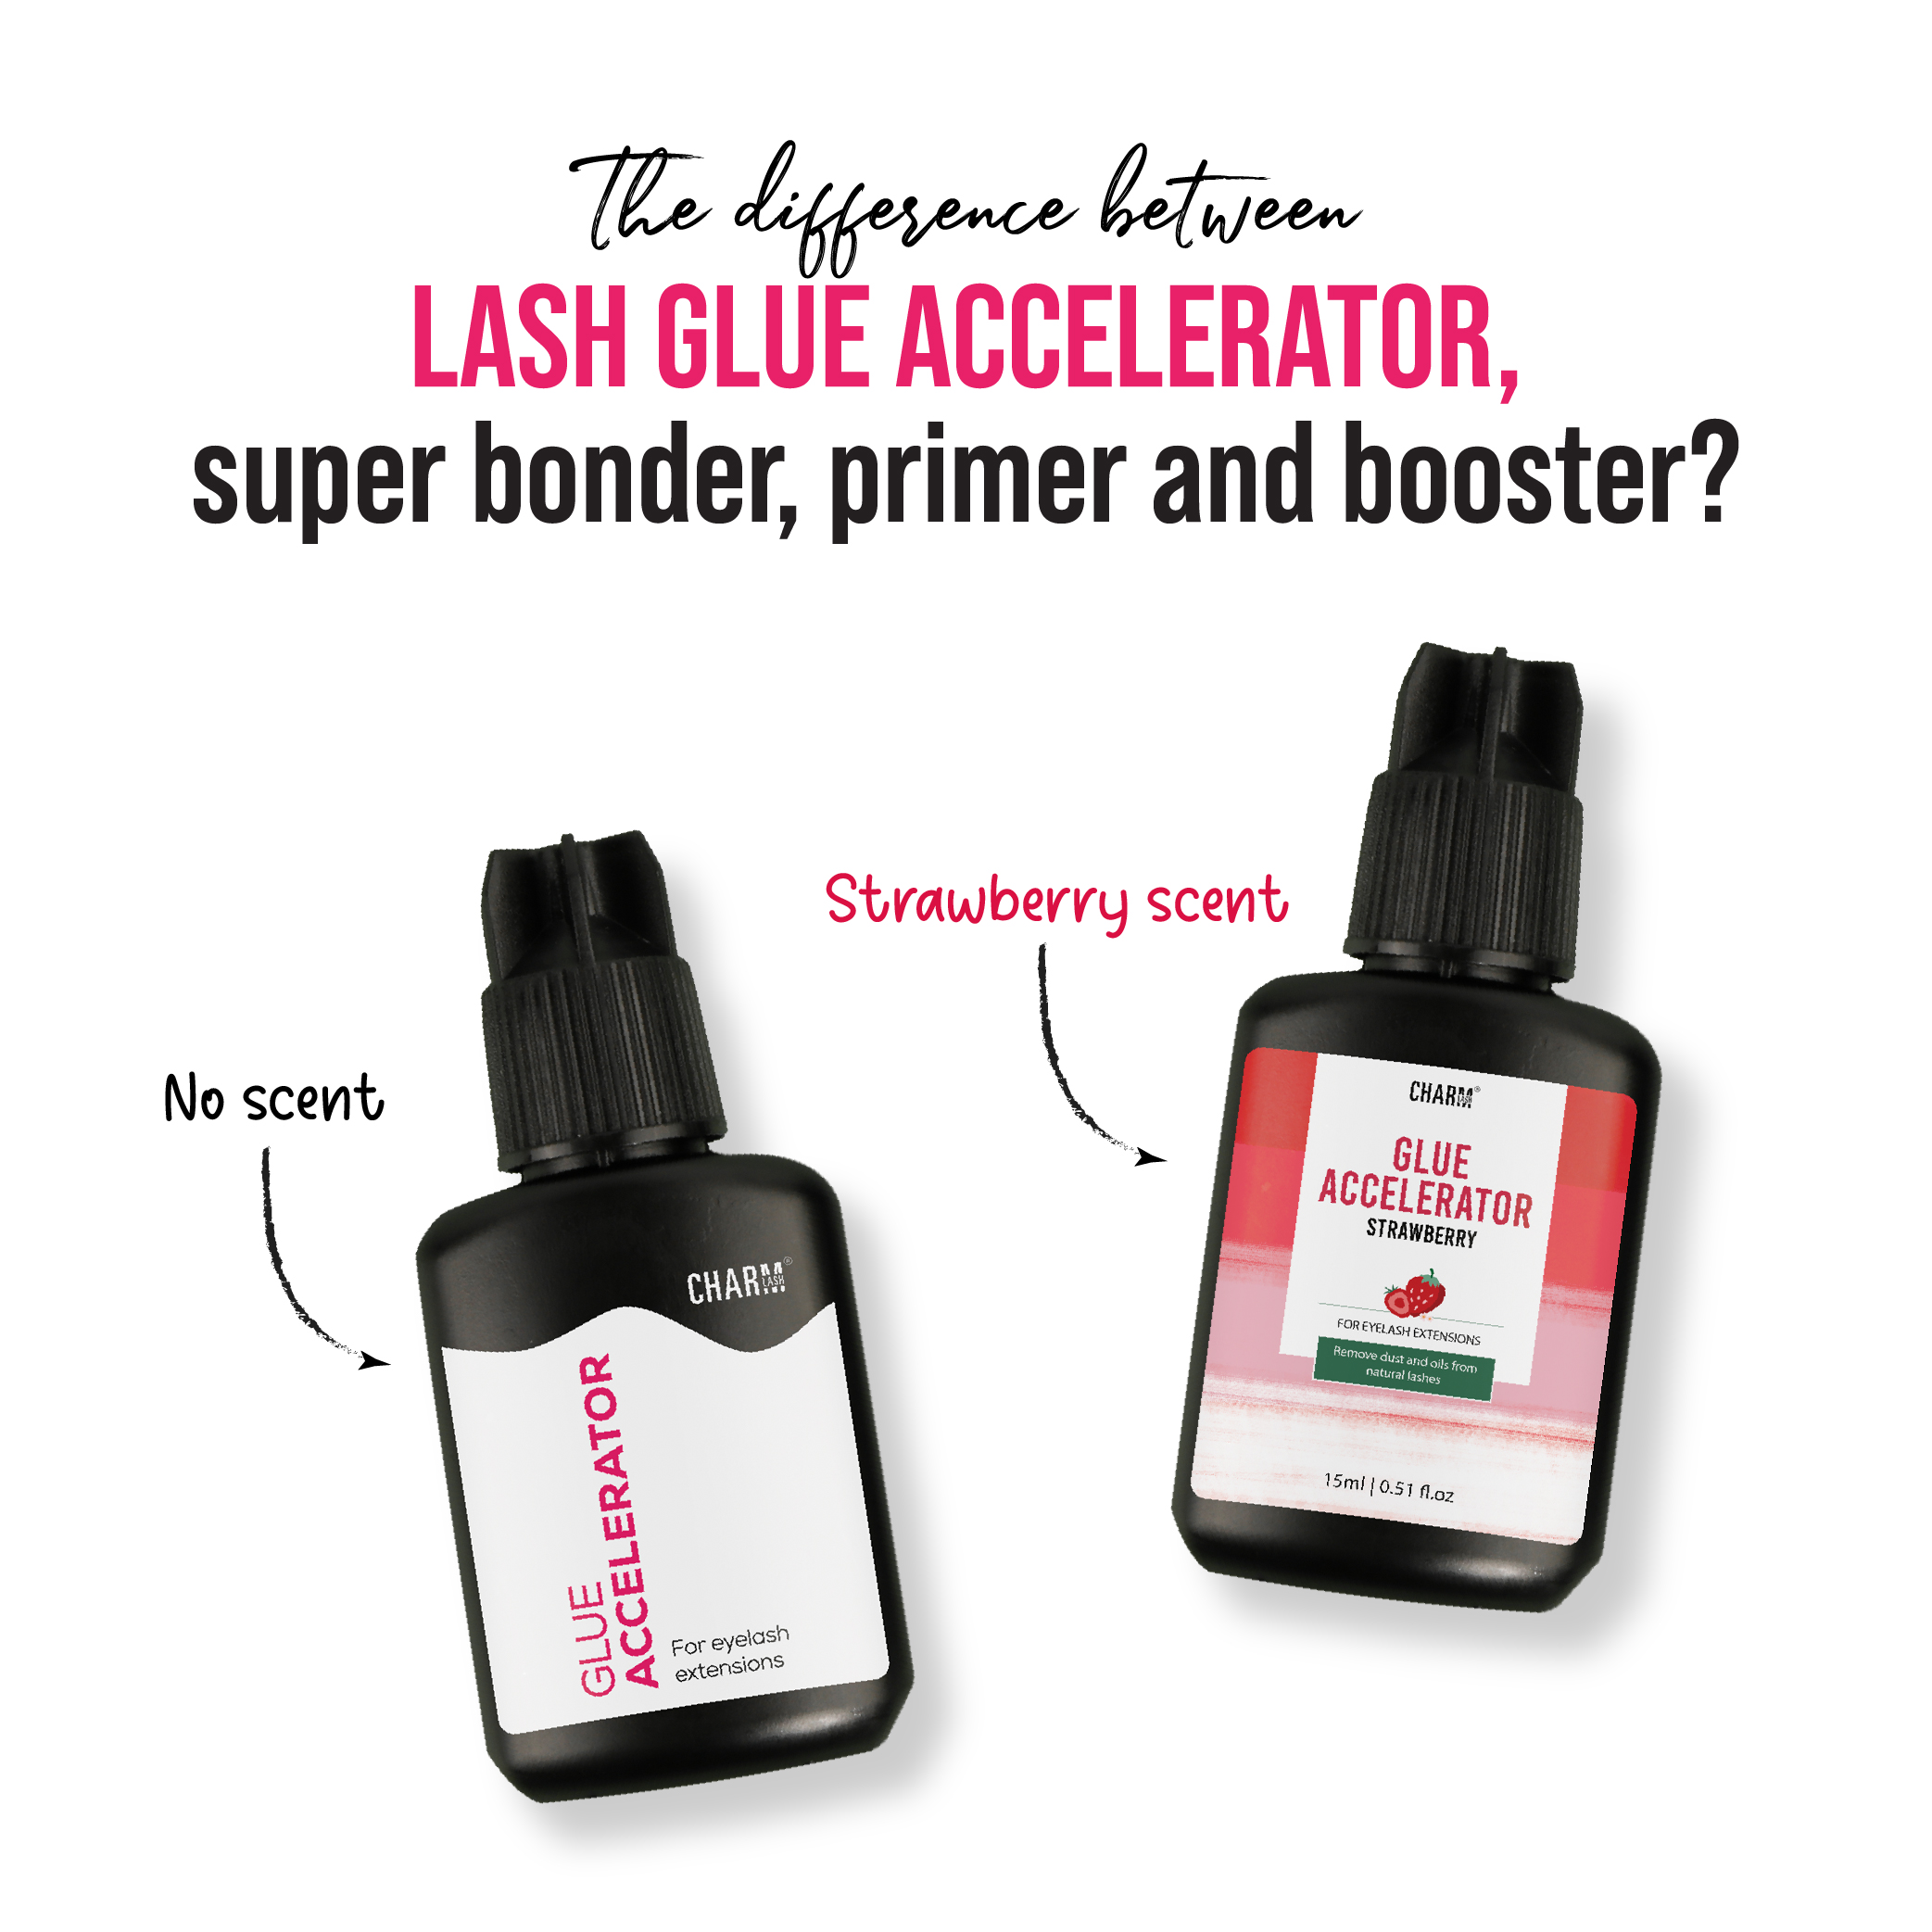 The difference between lash glue accelerator, super bonder, primer and booster